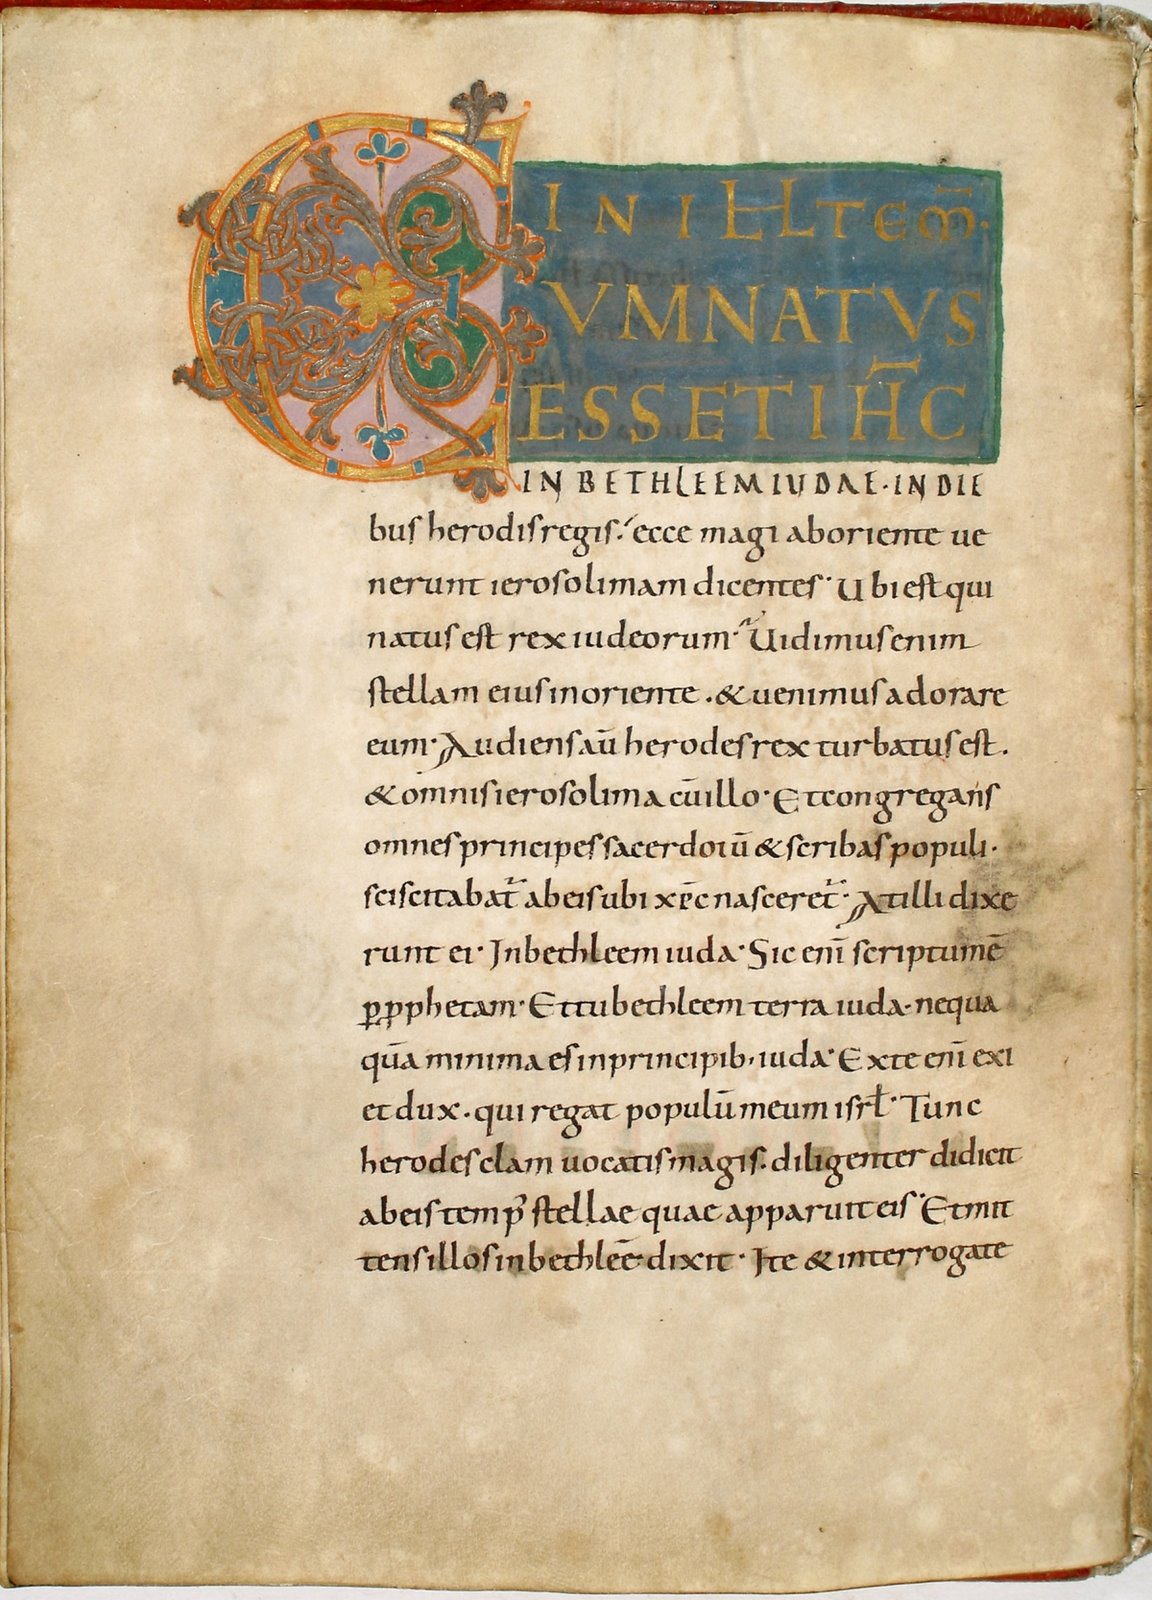 [Decoration+and+text+in+10th+century+manuscript.jpg]